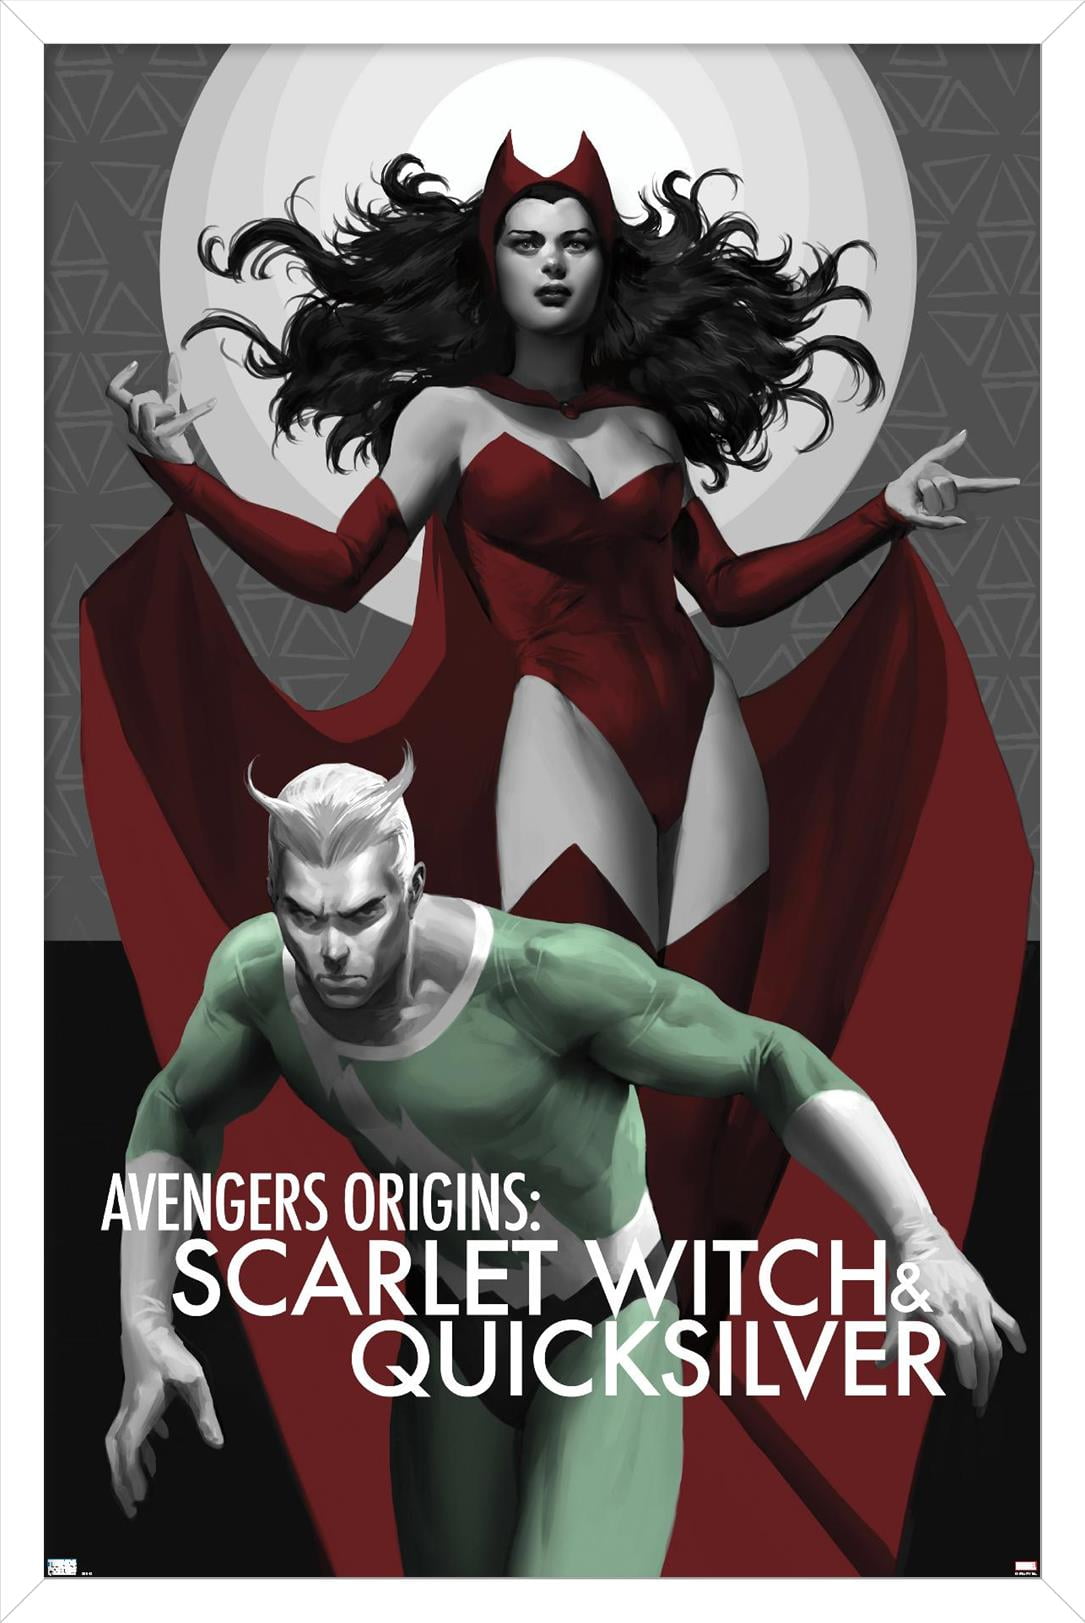 History Of Quicksilver & Scarlet Witch 